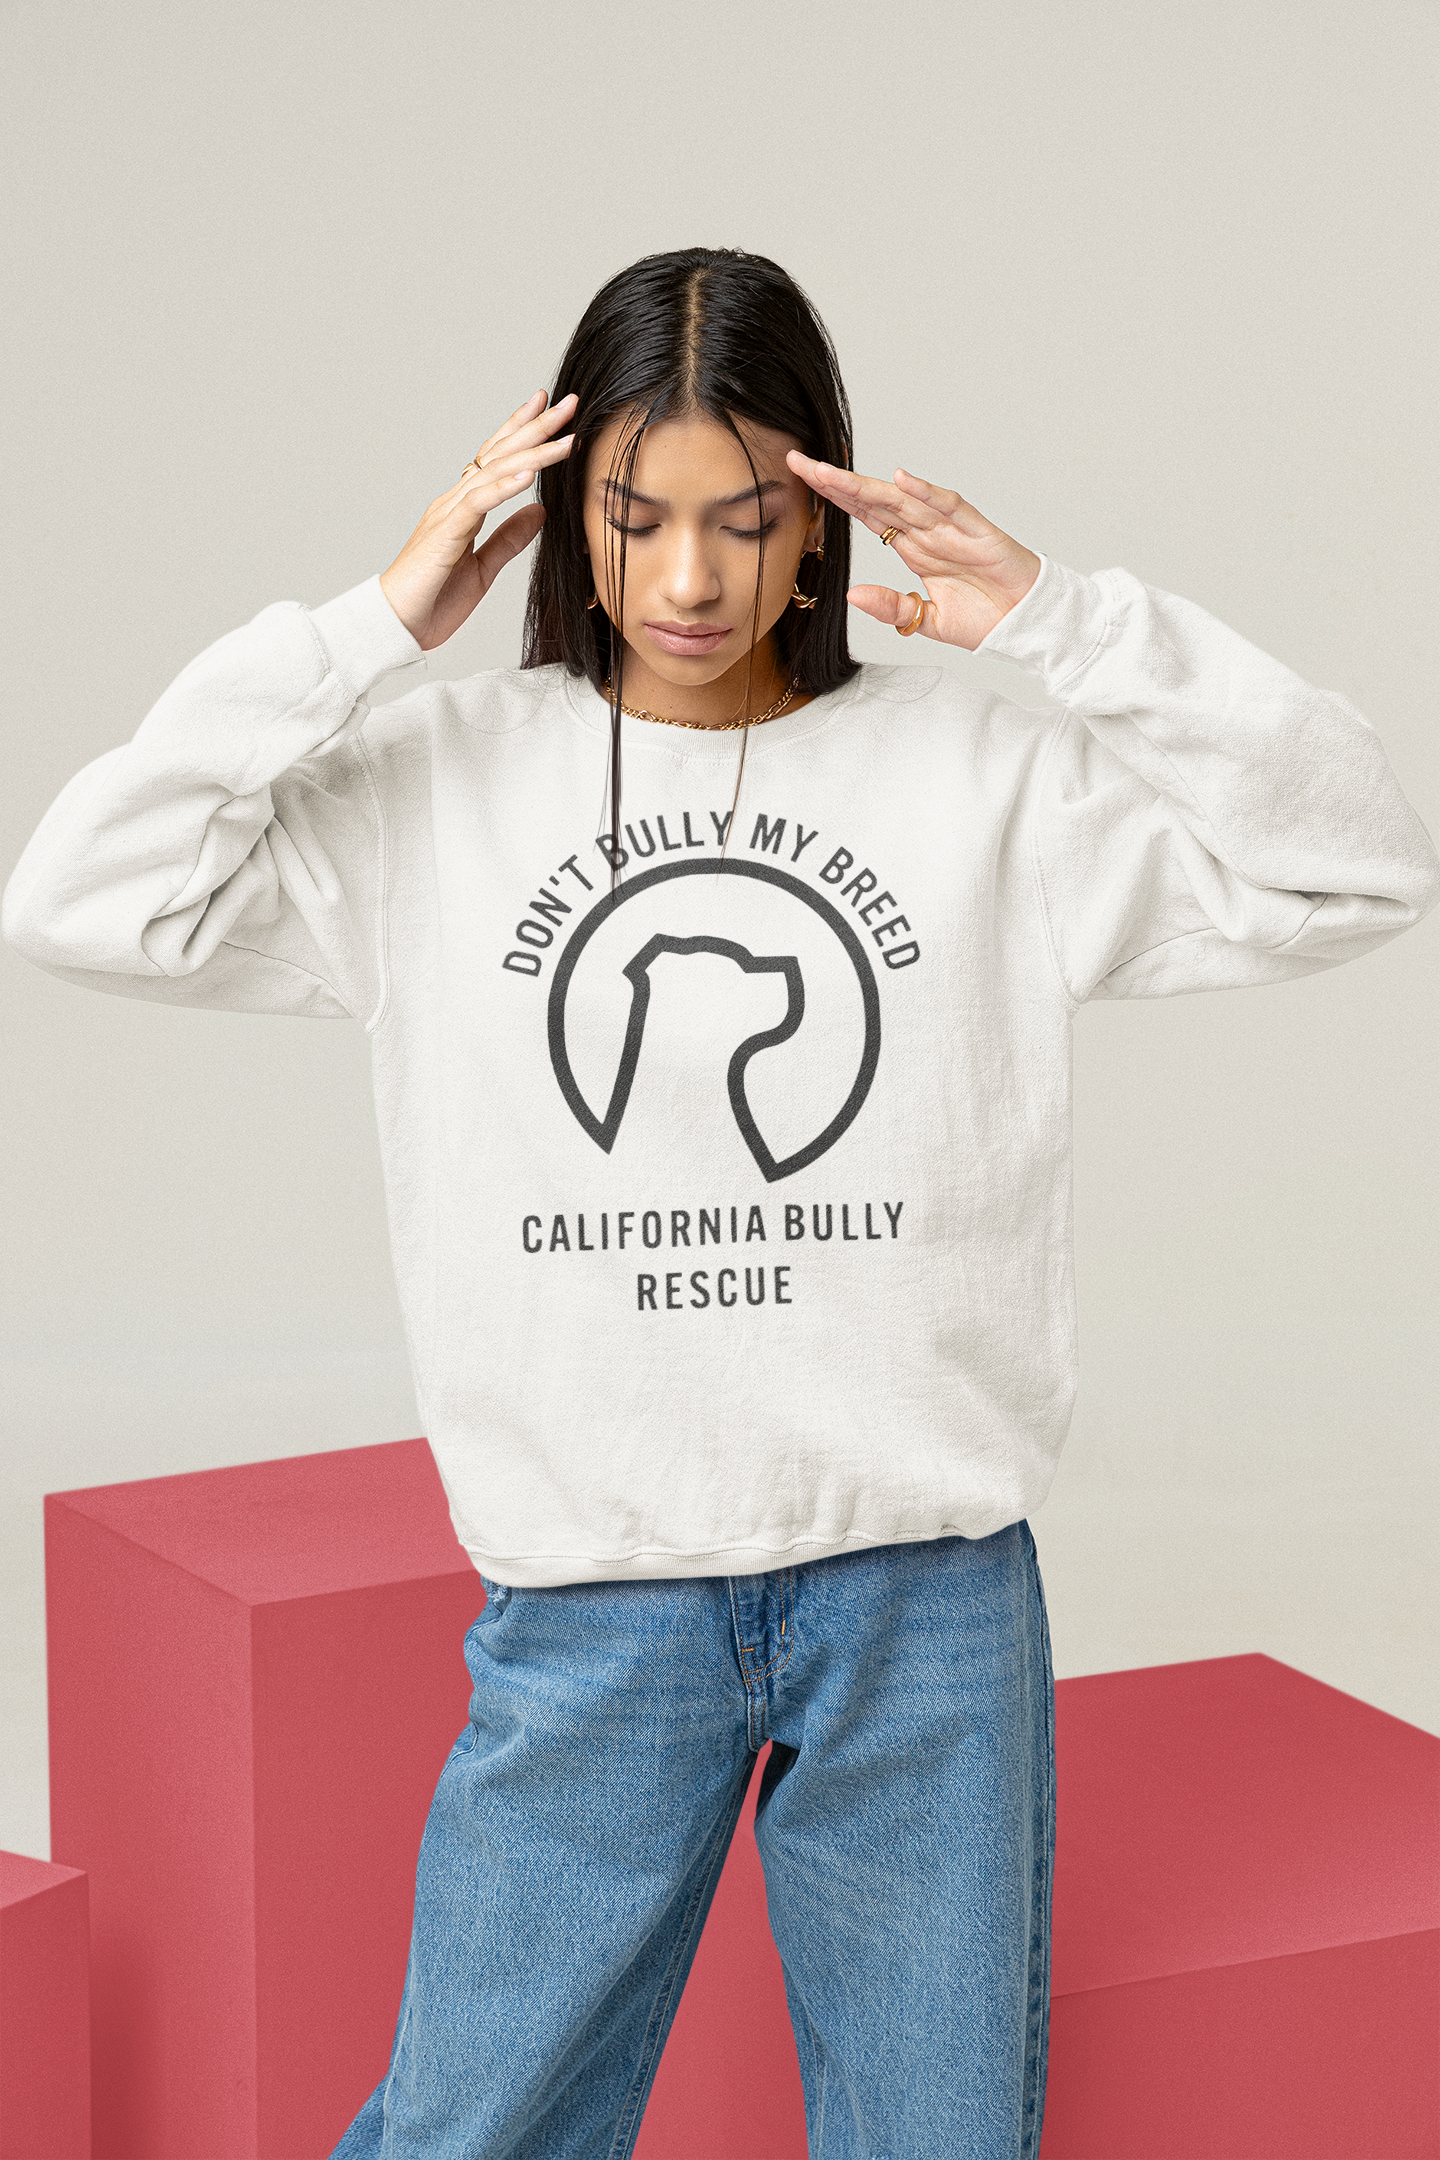 California Bully Rescue Sweatshirt (available in several colors)